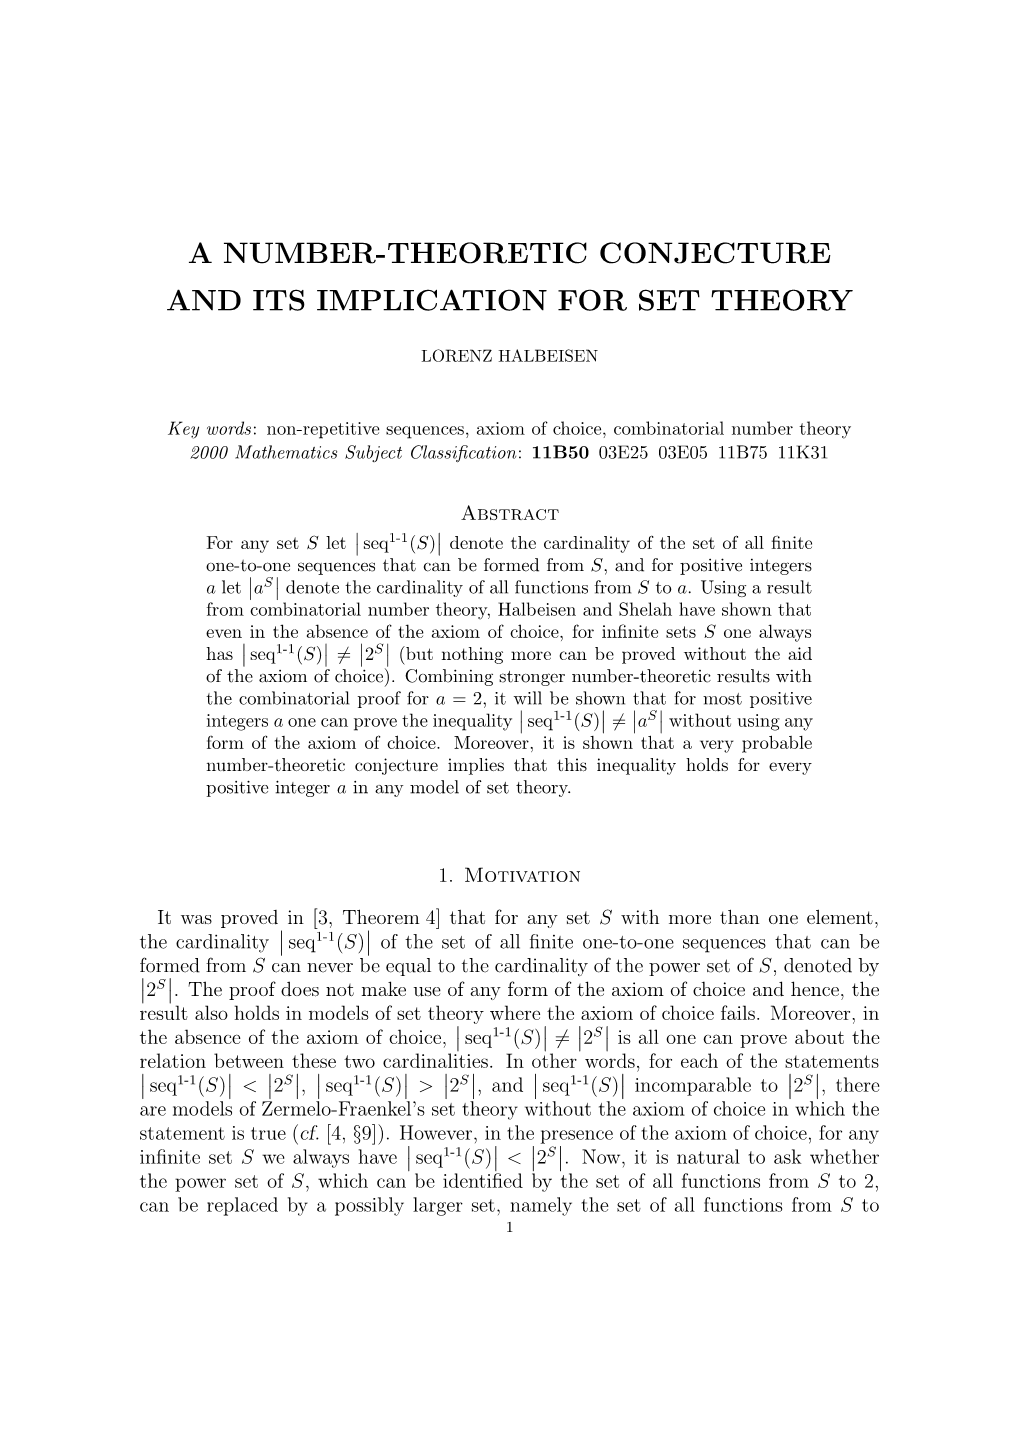 A Number-Theoretic Conjecture and Its Implication for Set Theory